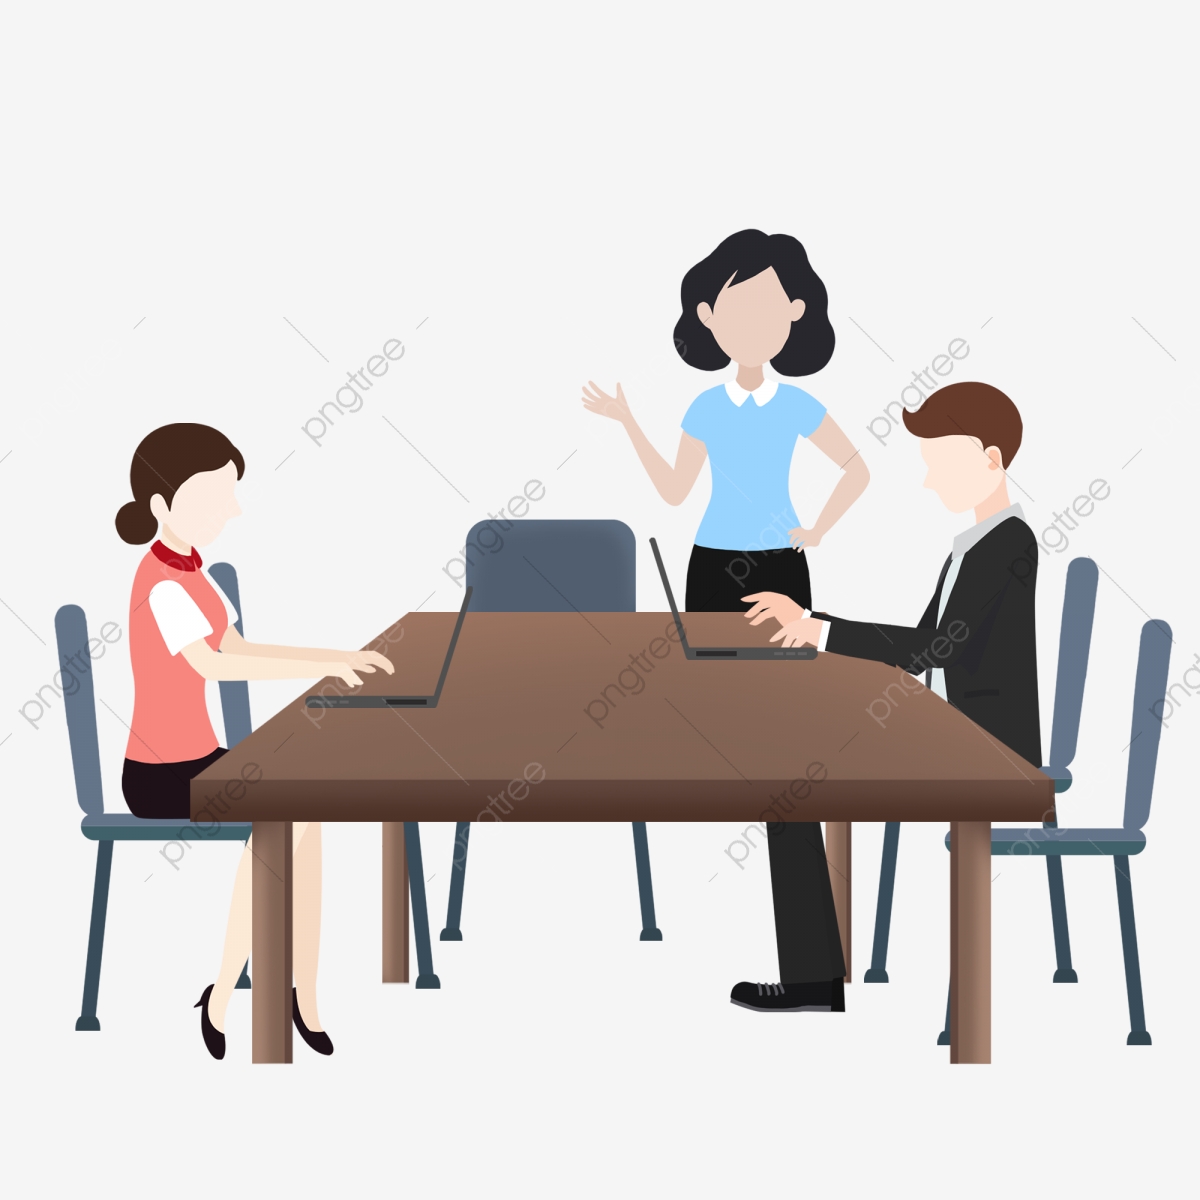 pngtree-cartoon-minimalist-person-in-a-meeting-illustration-design-meetingcharacter-png-image 4068707